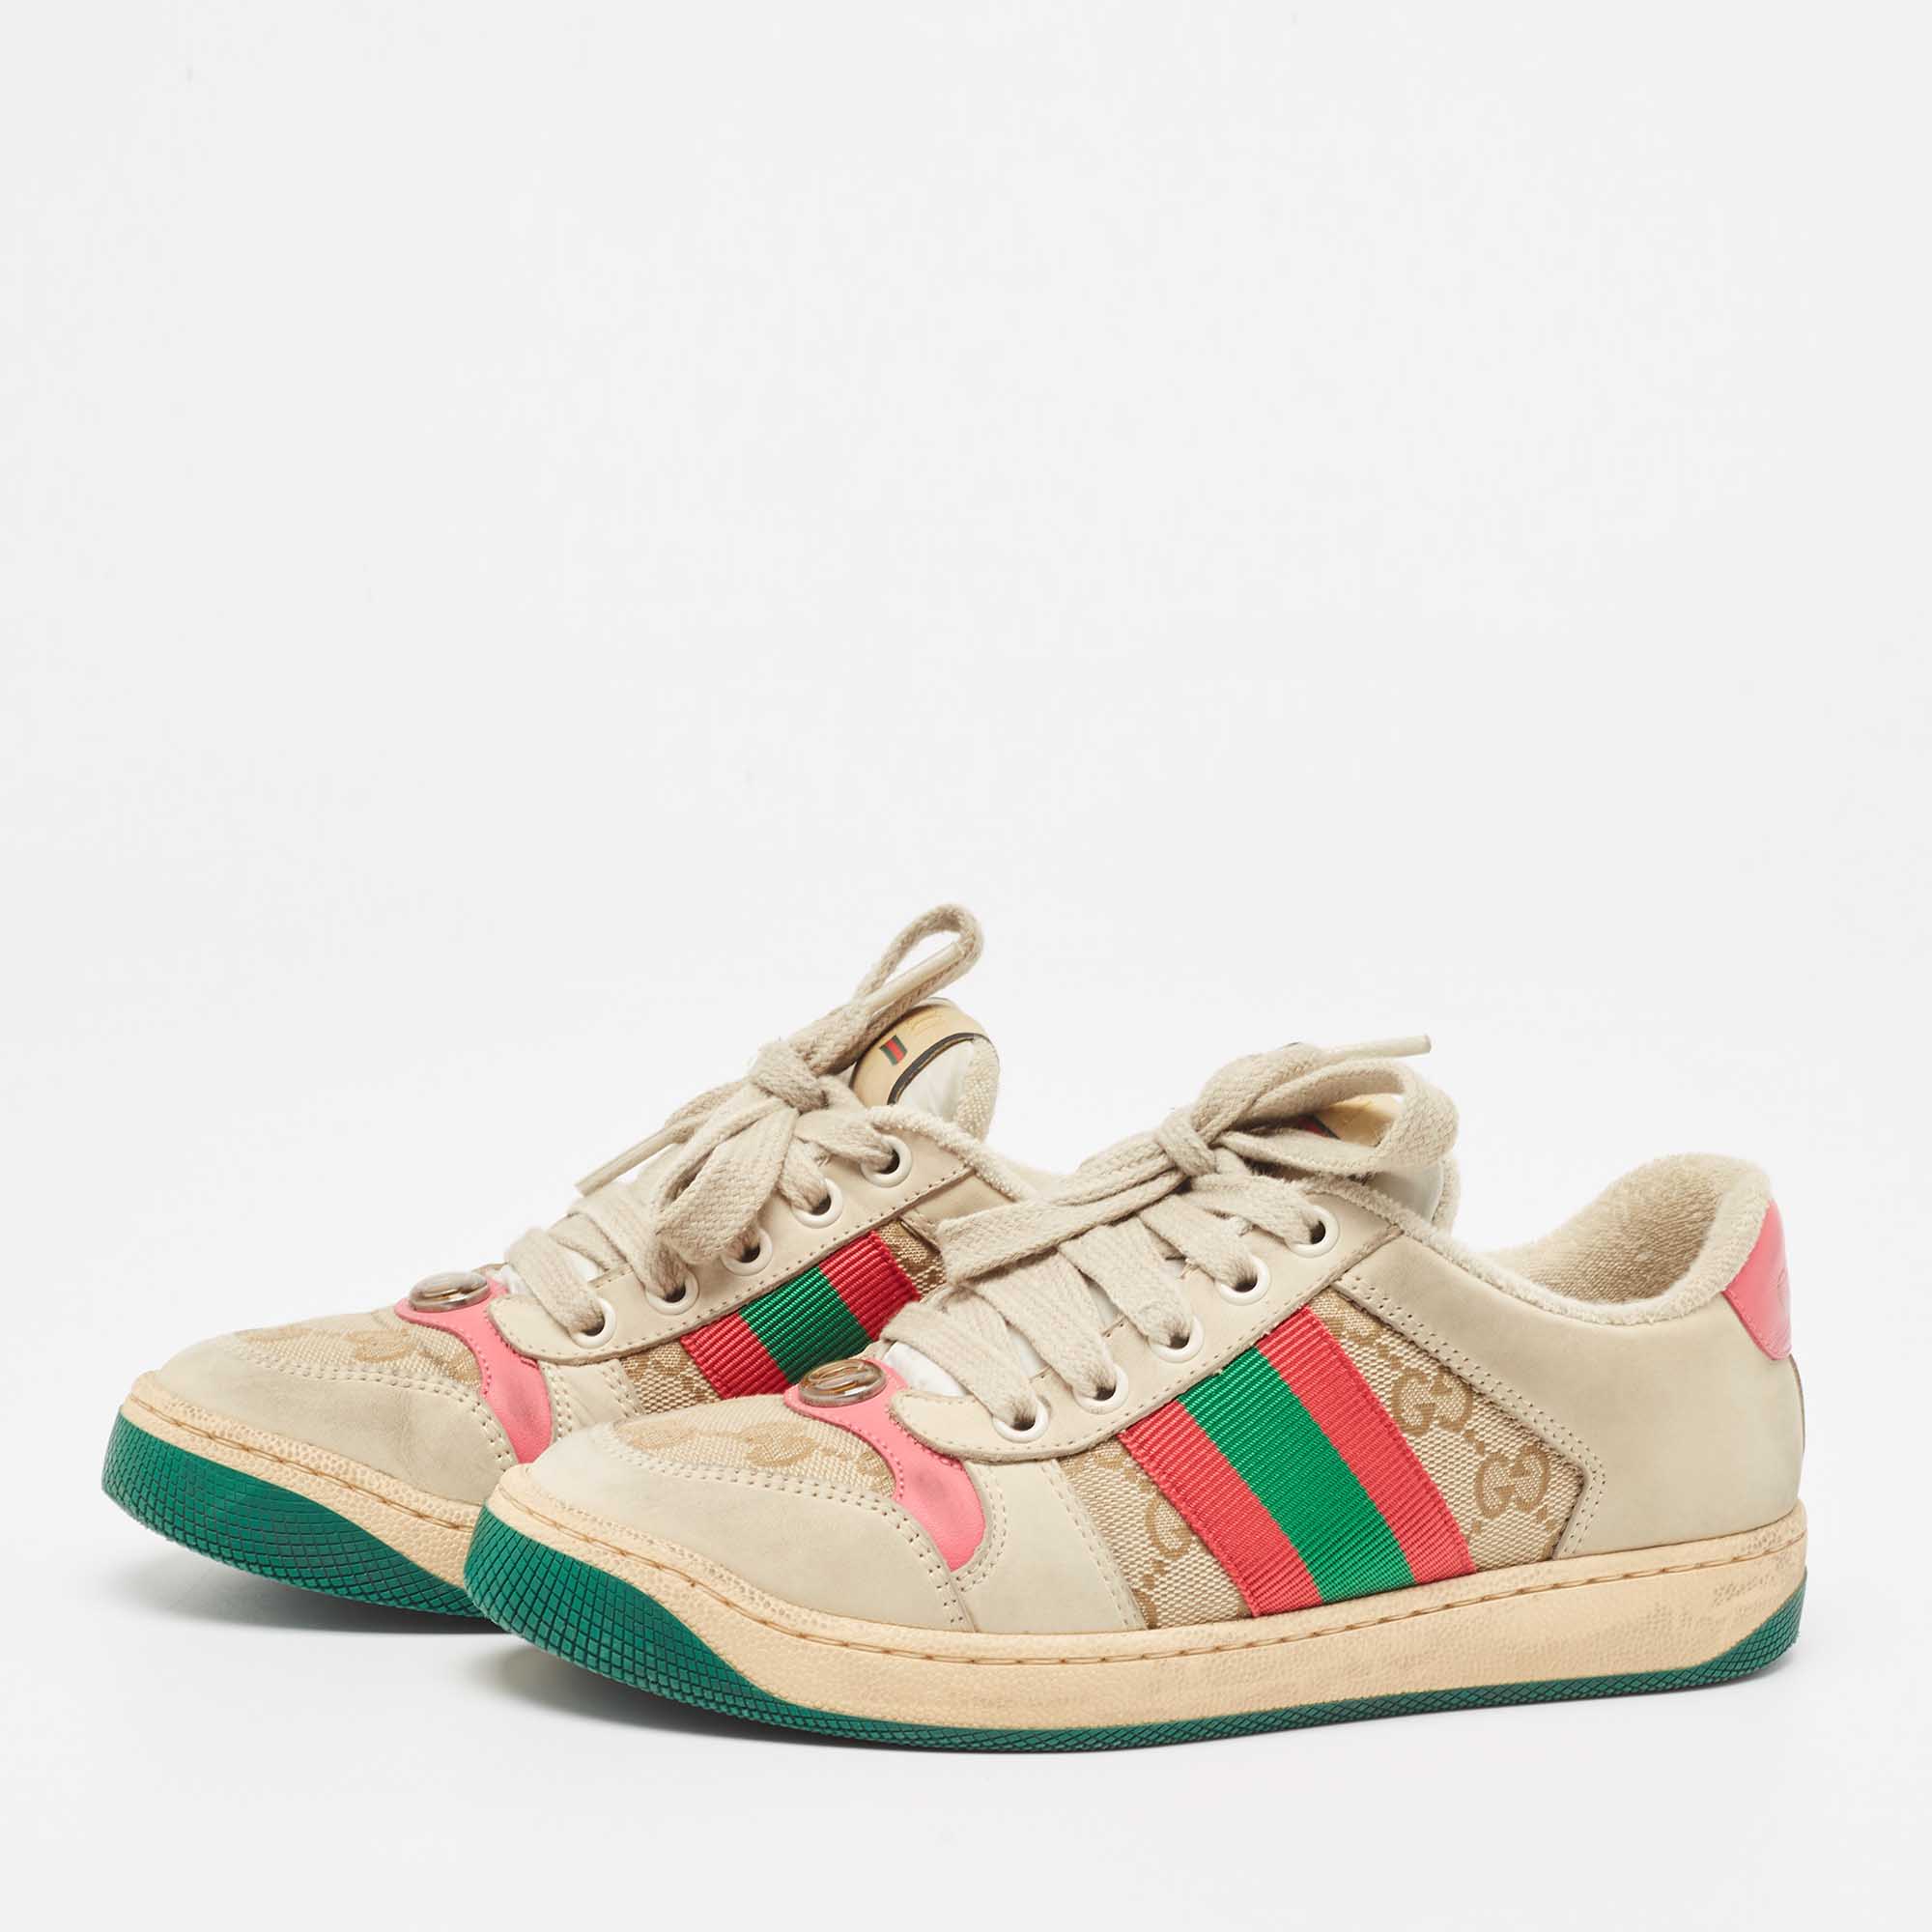 

Gucci Grey/Pink Nubuck Leather Screener Sneakers Size